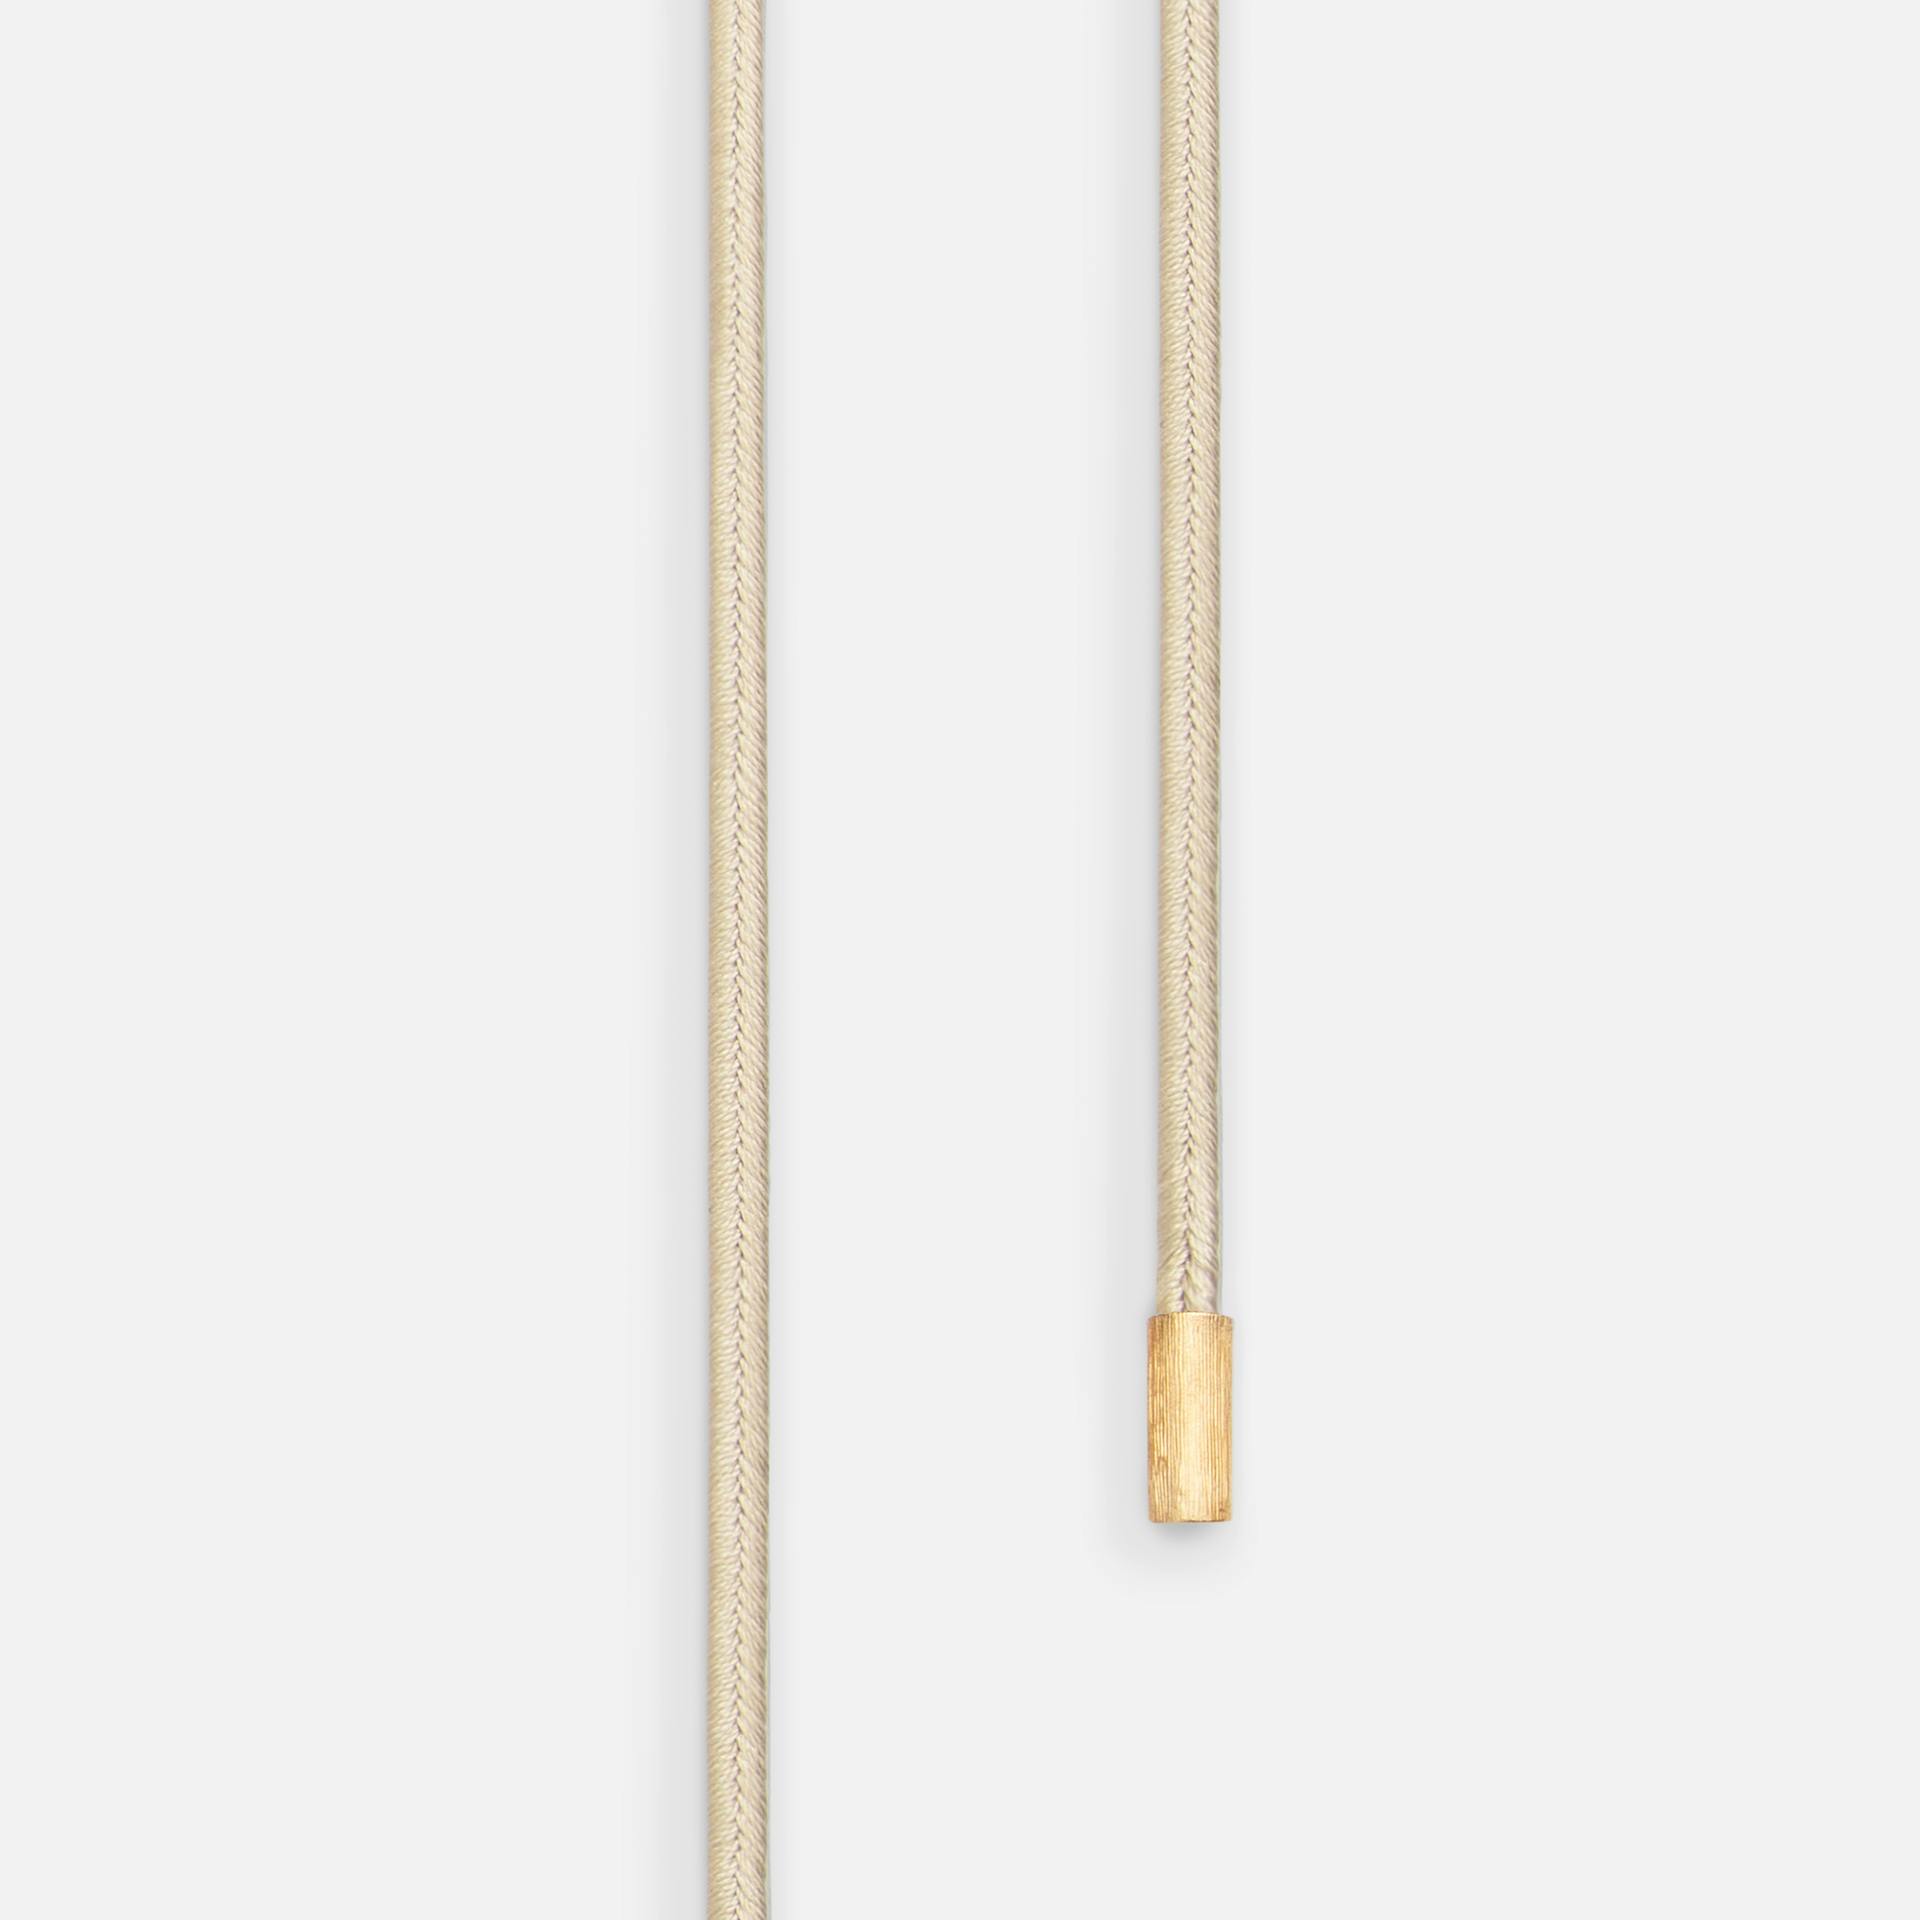 Necklace string Beige Design string with end pieces in 18k gold